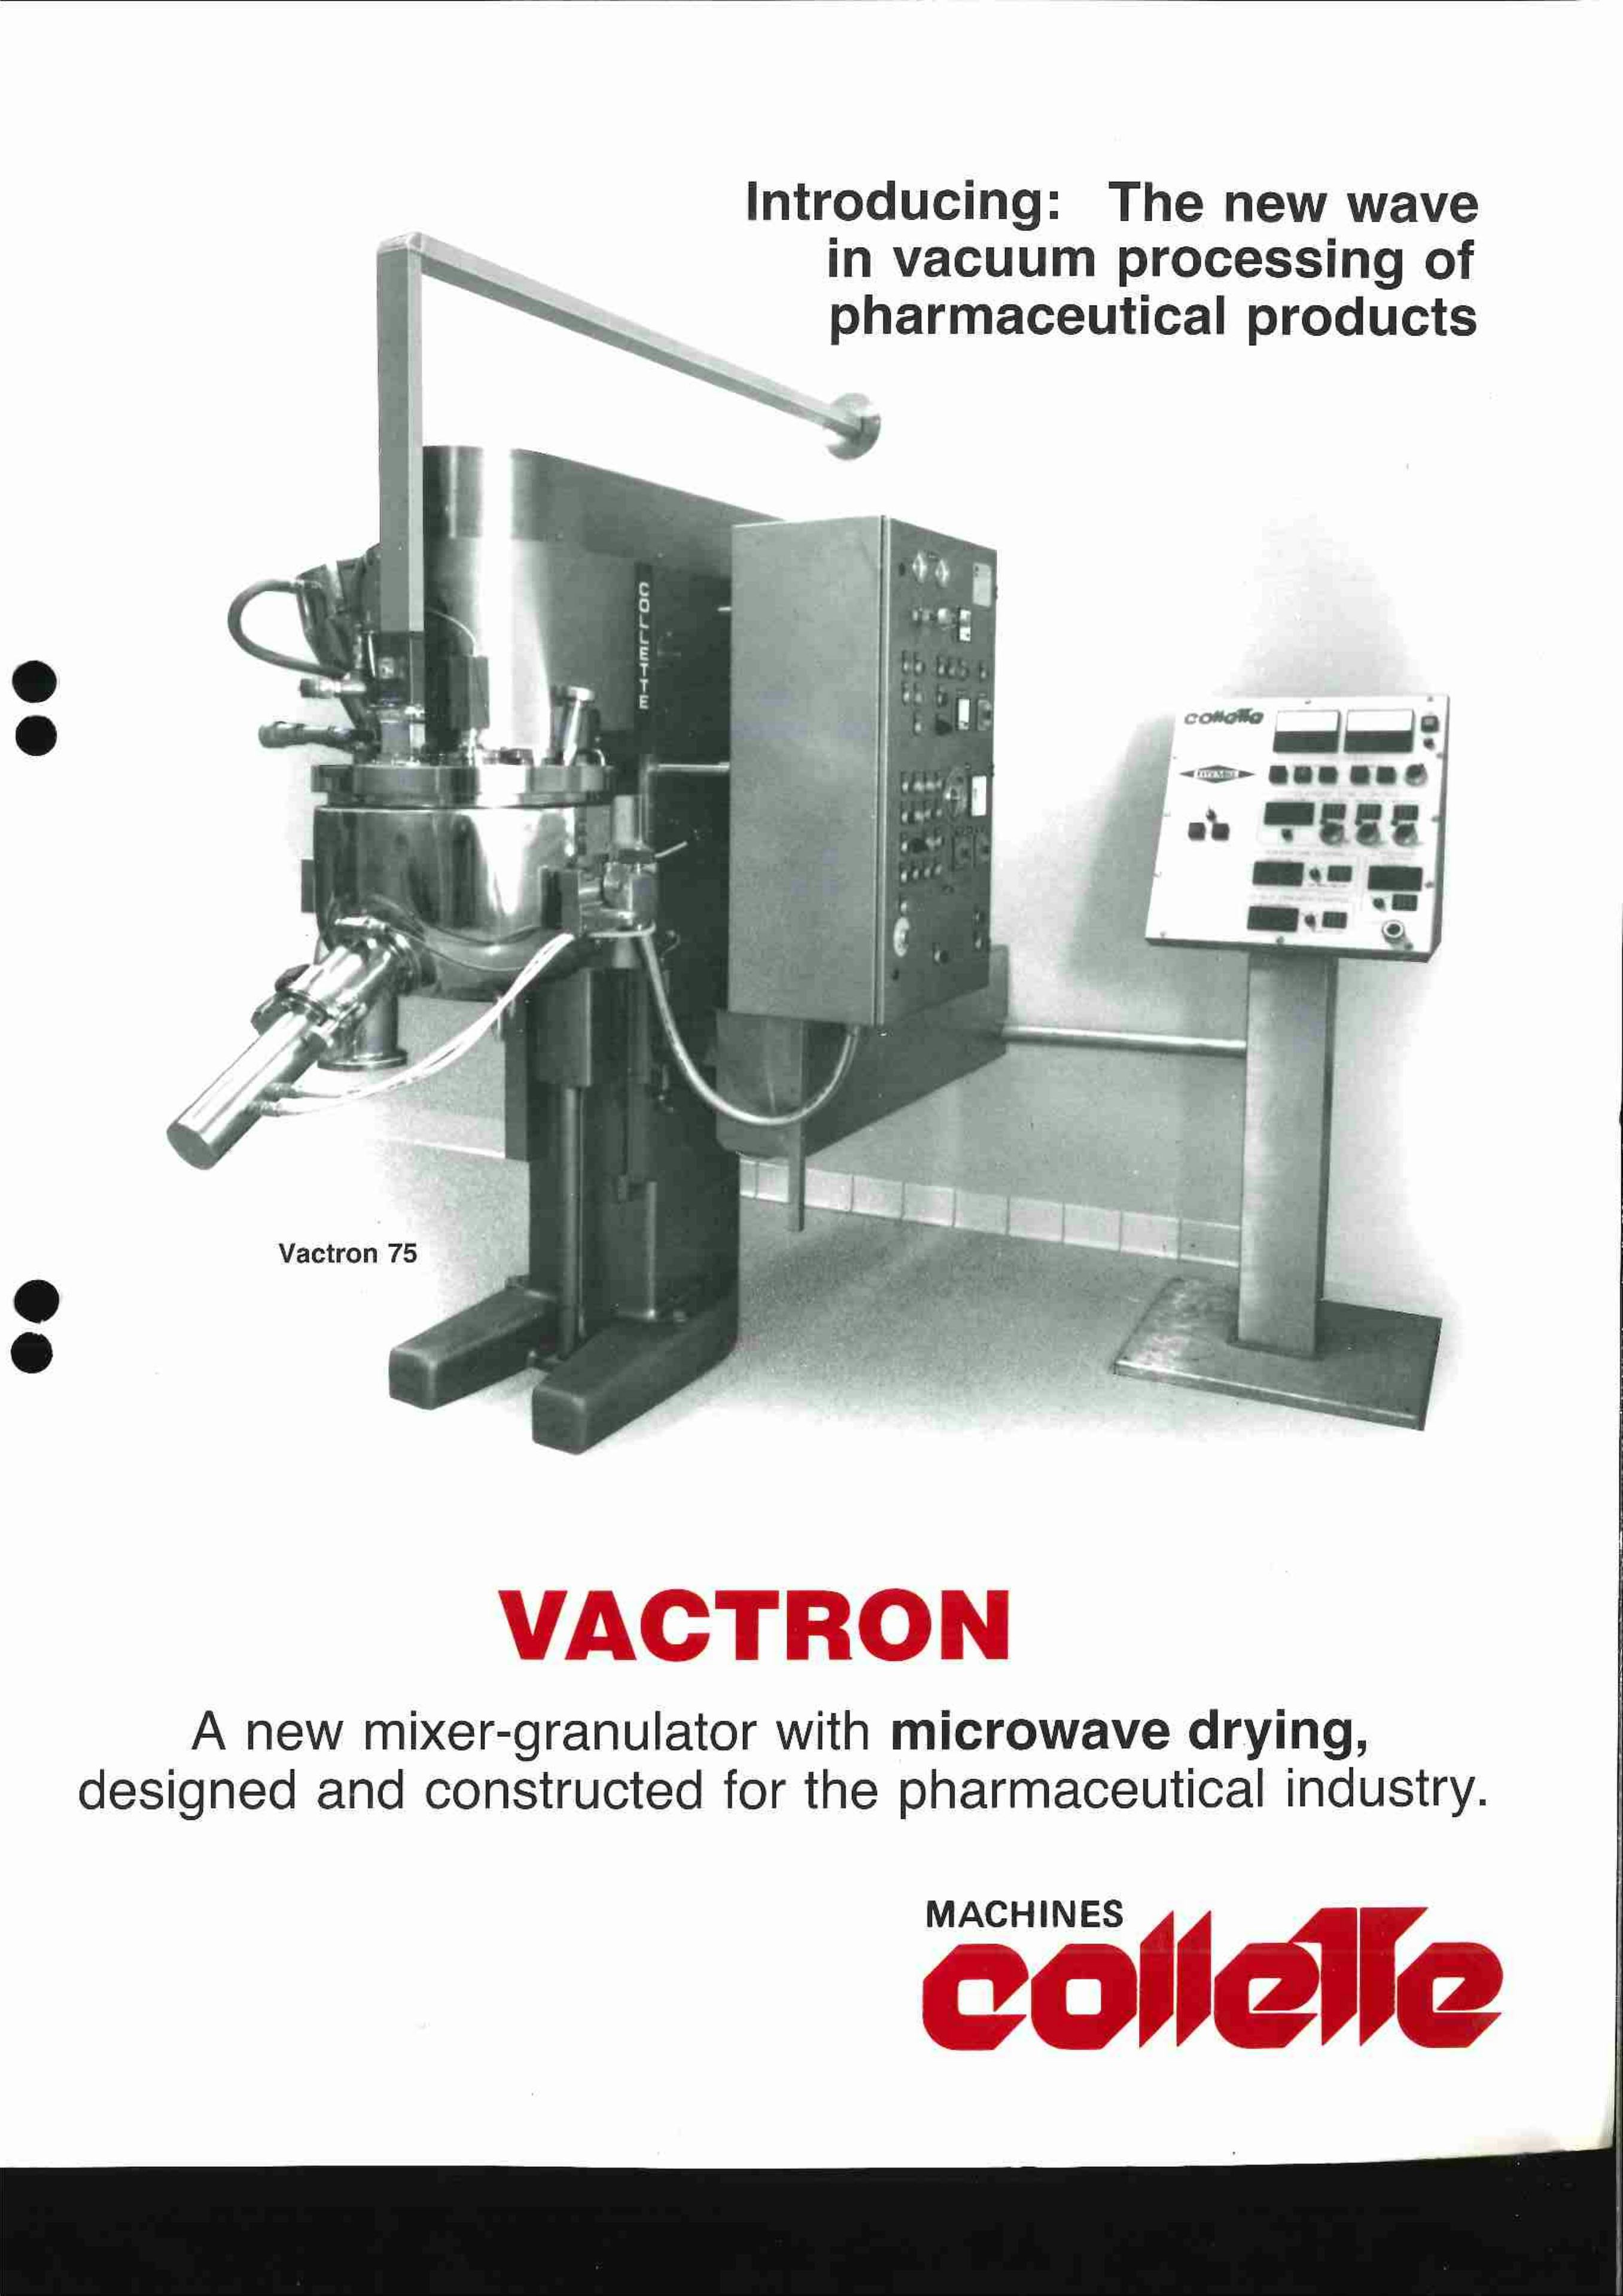 Collette GRAL 75 Vactron Microwave Drying and Solvent Recovery - Universal mixer - image 22